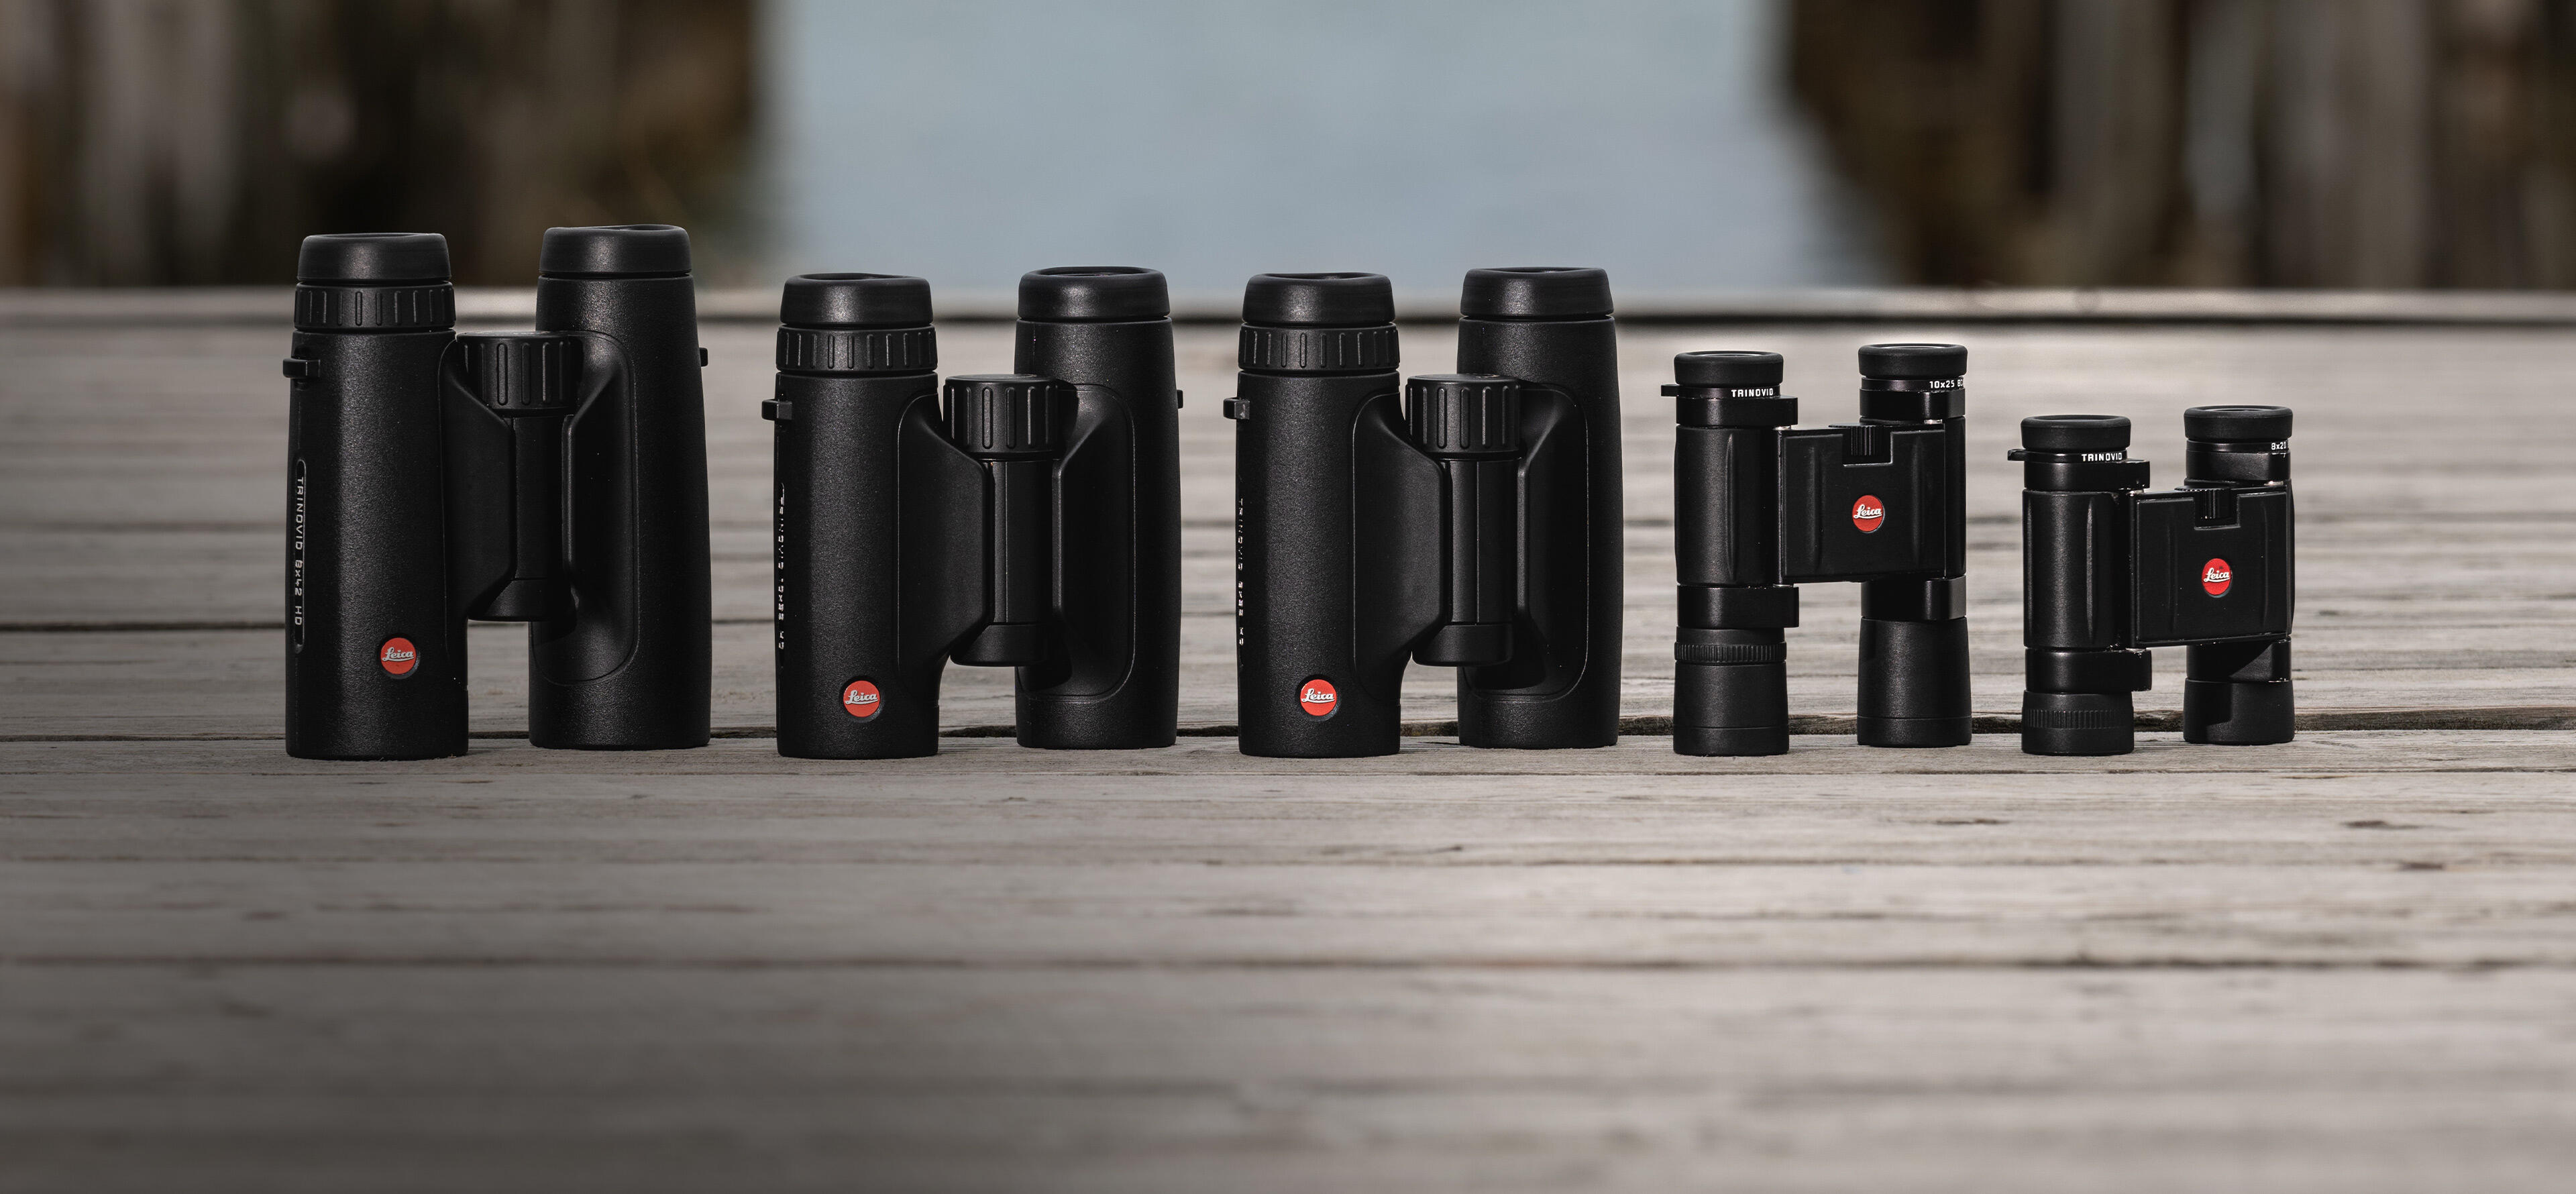 leica-trinovid-binoculars-lined-up-on-a-wooden-bridge-by-the-sea